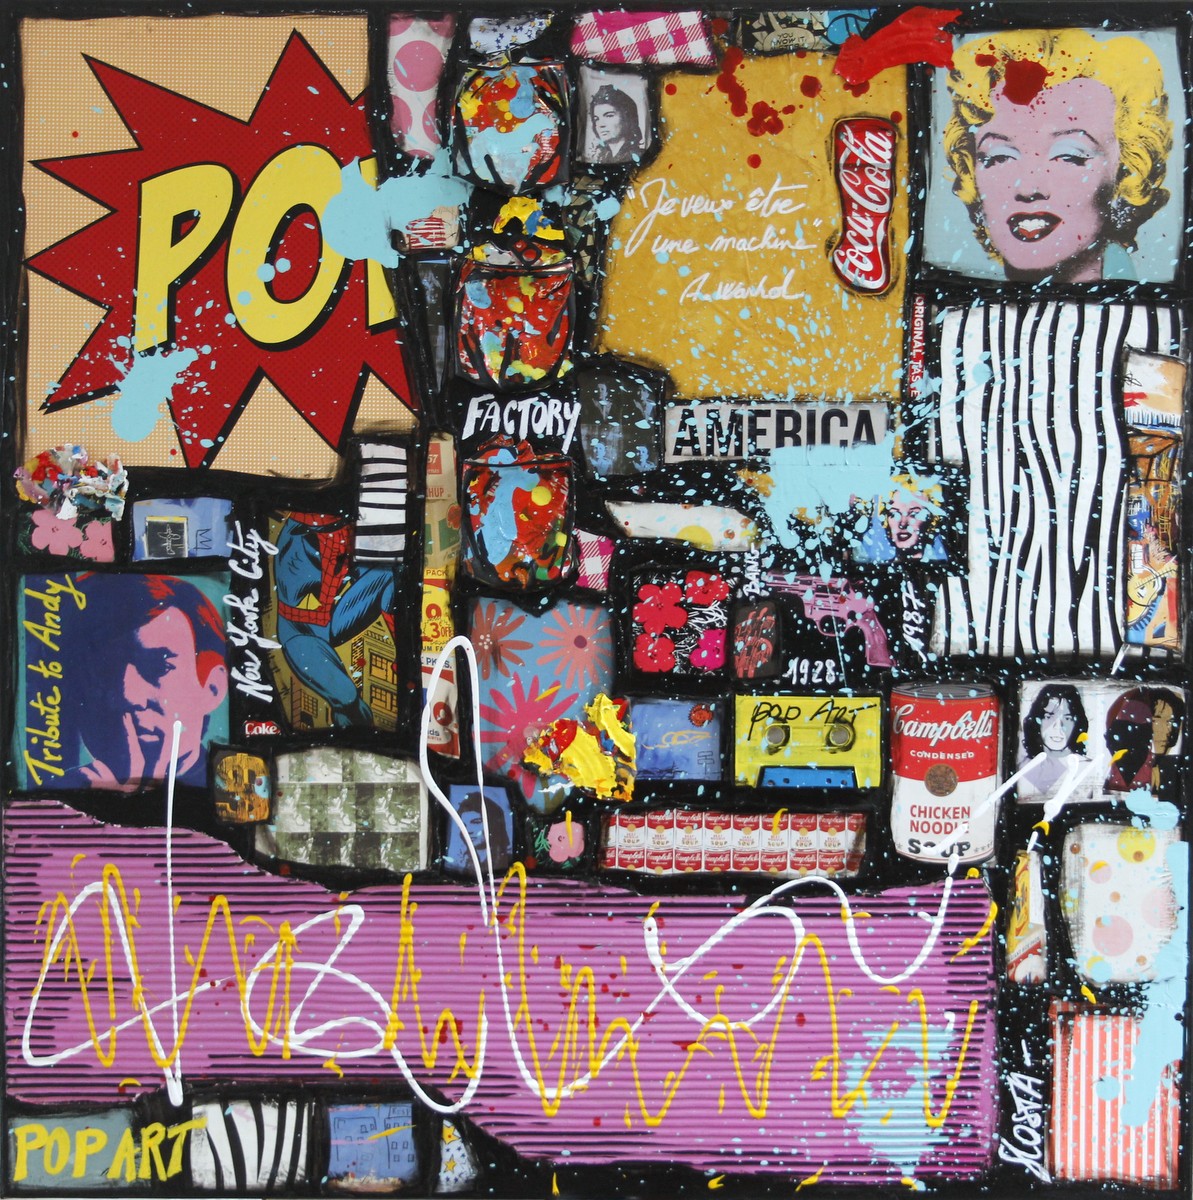 collage, popart, andy warhol Tableau Contemporain, Tribute to Andy # 2. Sophie Costa, artiste peintre.